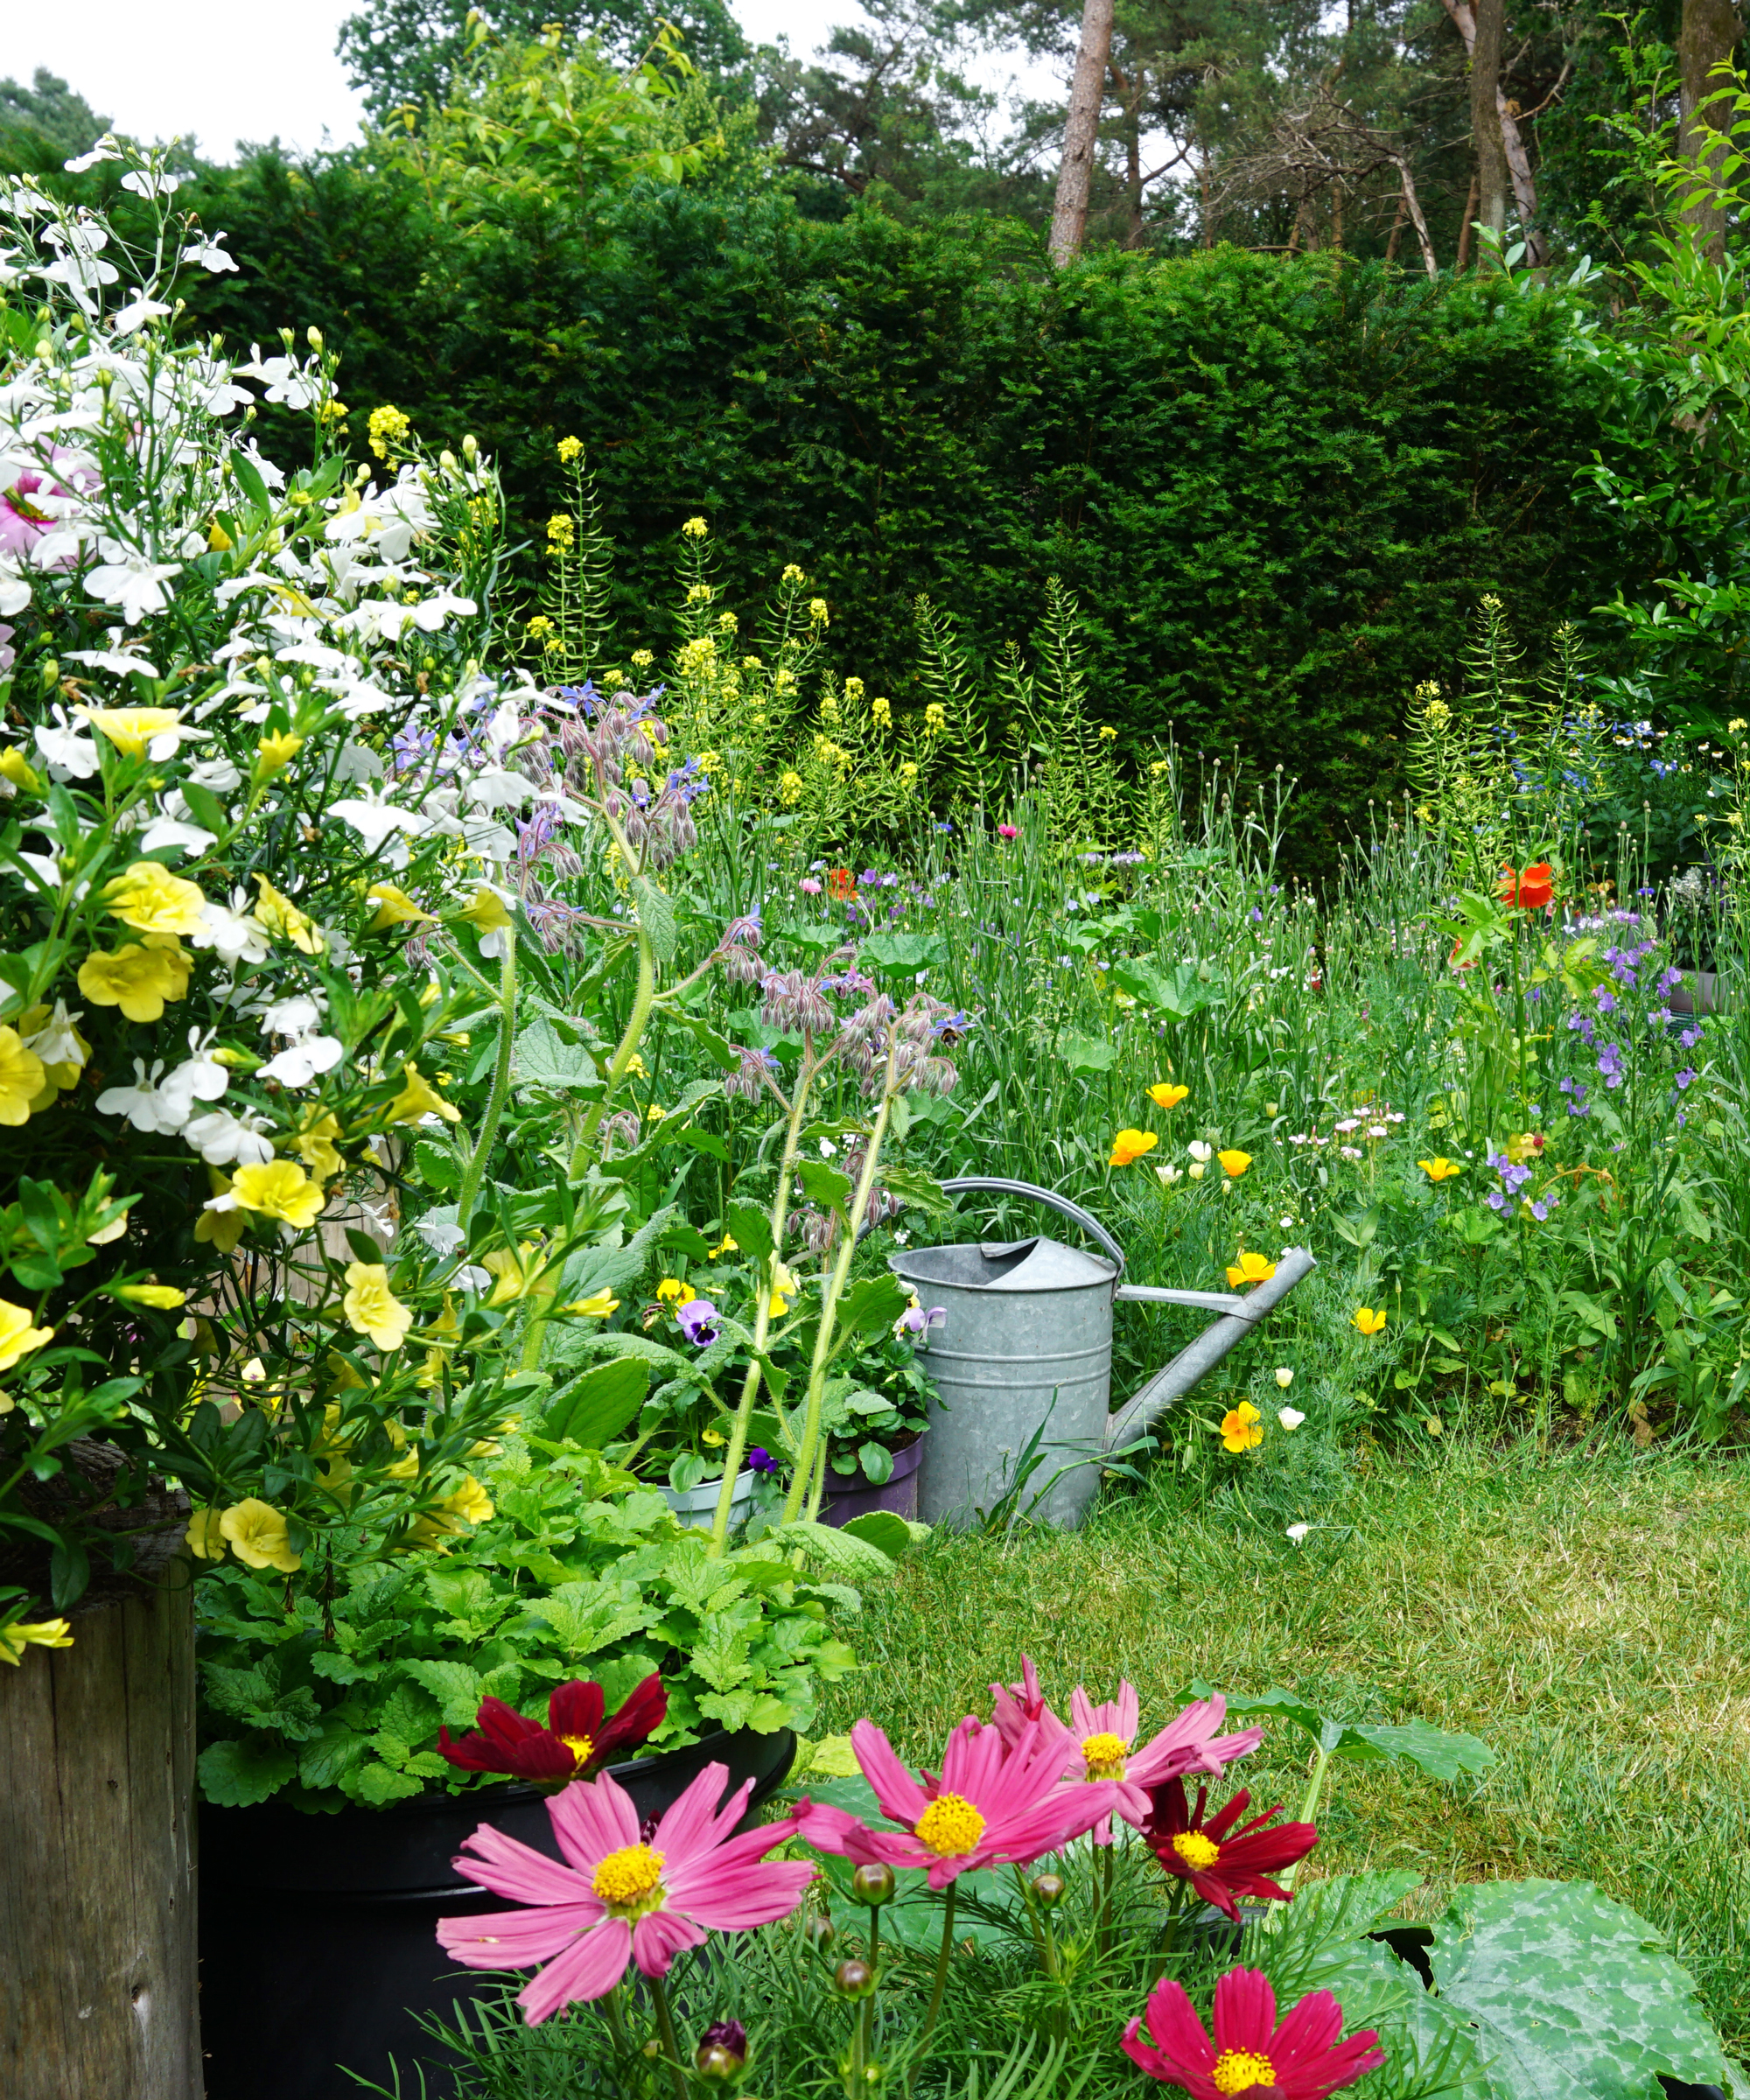 An overgrown garden with flowers, weeds, and a silver watering can